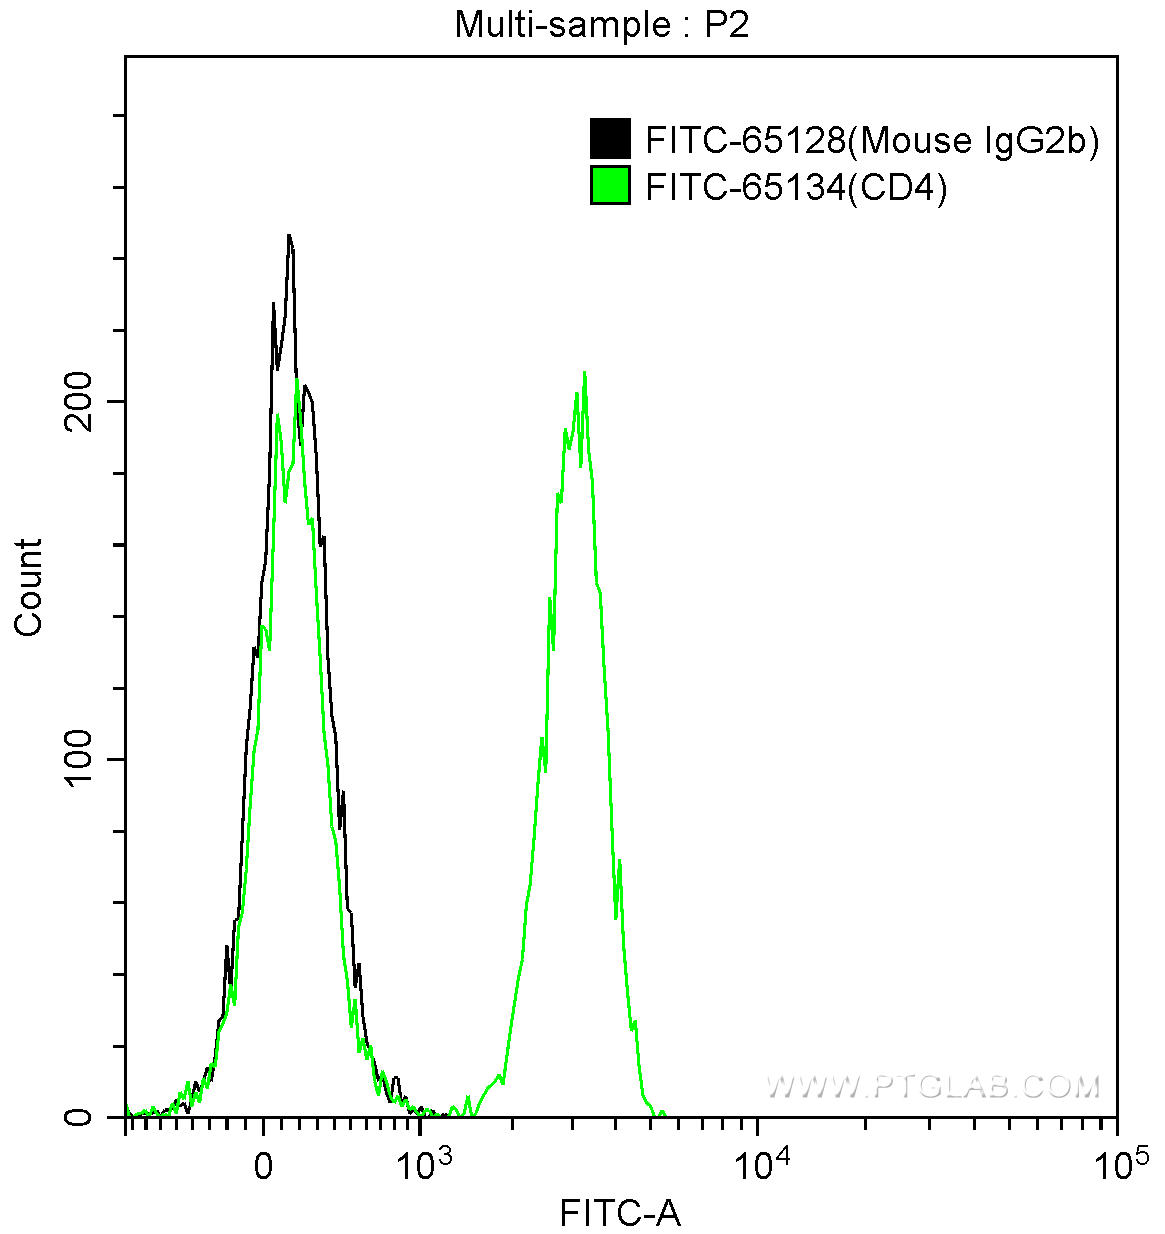 1X10^6 human peripheral blood lymphocytes were surface stained with 0.2 ug FITC Mouse IgG2b Isotype Control (FITC-65128, Clone: MPC-11) (black) or 0.2 ug FITC Anti-Human CD4 (FITC-65134, Clone: OKT4) (green). Samples were not fixed.